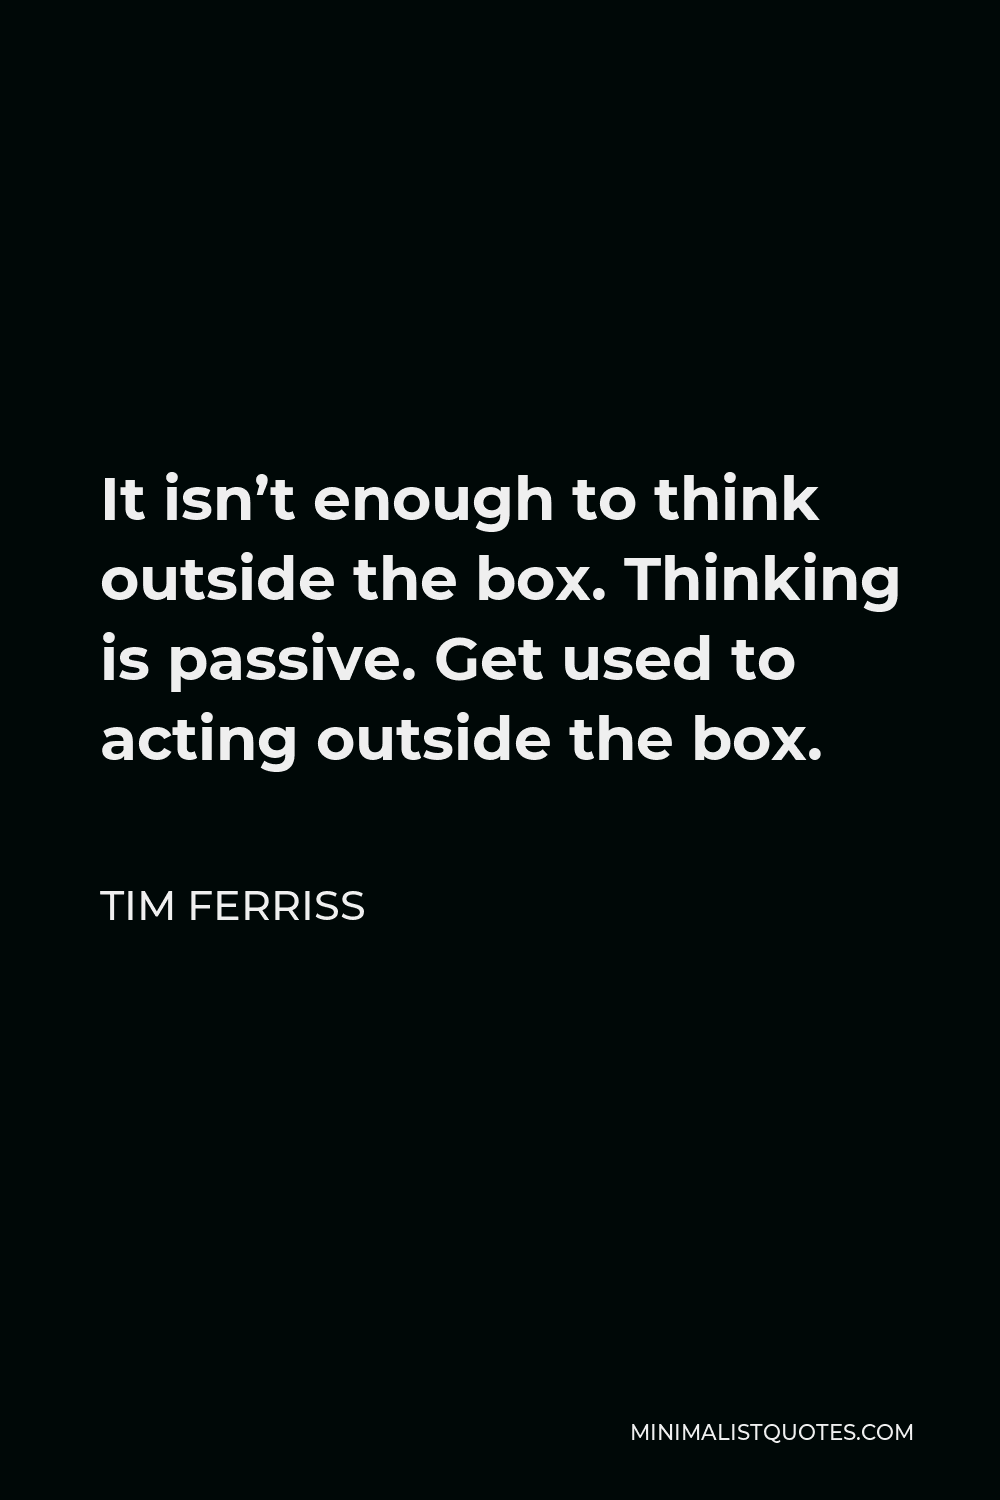 Tim Ferriss Quote - It isn’t enough to think outside the box. Thinking is passive. Get used to acting outside the box.